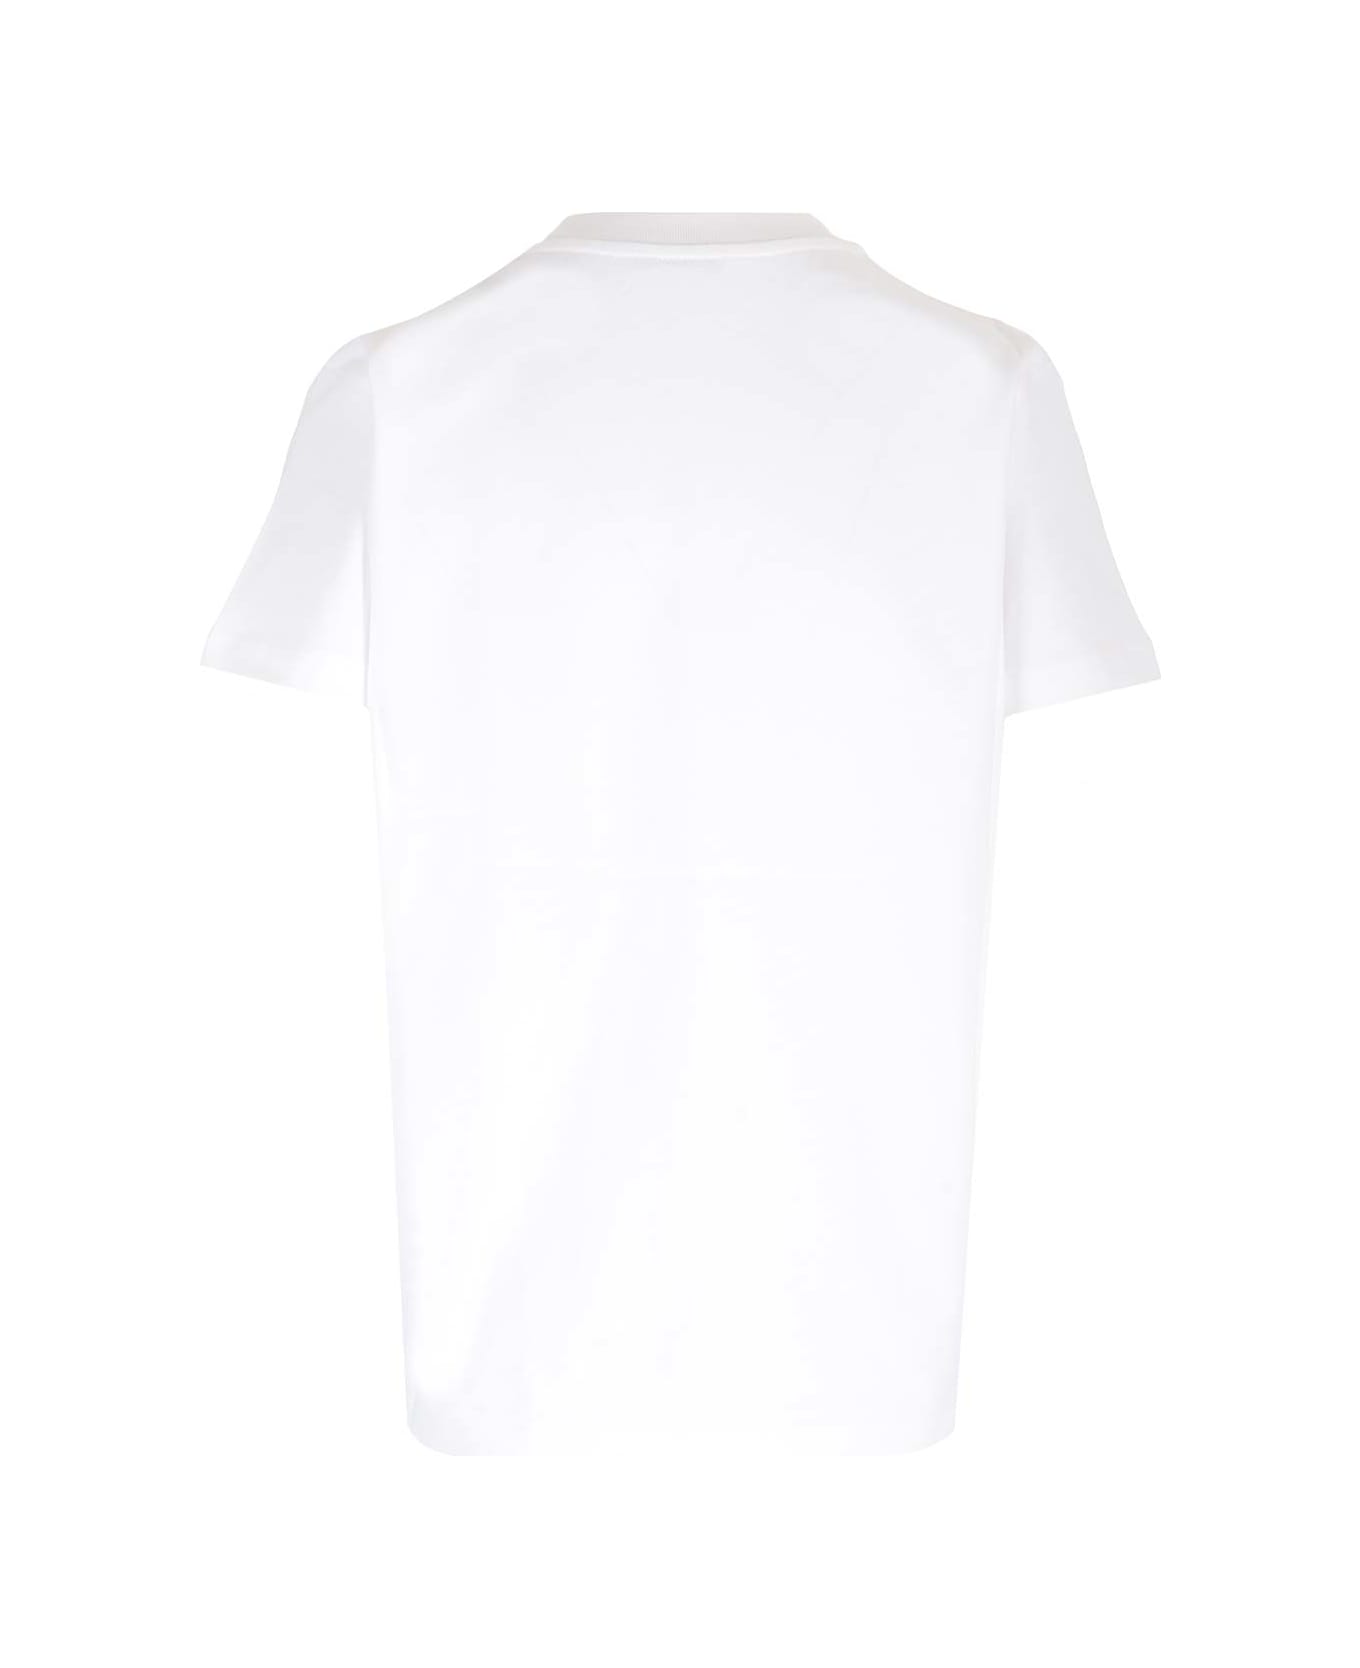 Moncler Embroidered T-shirt